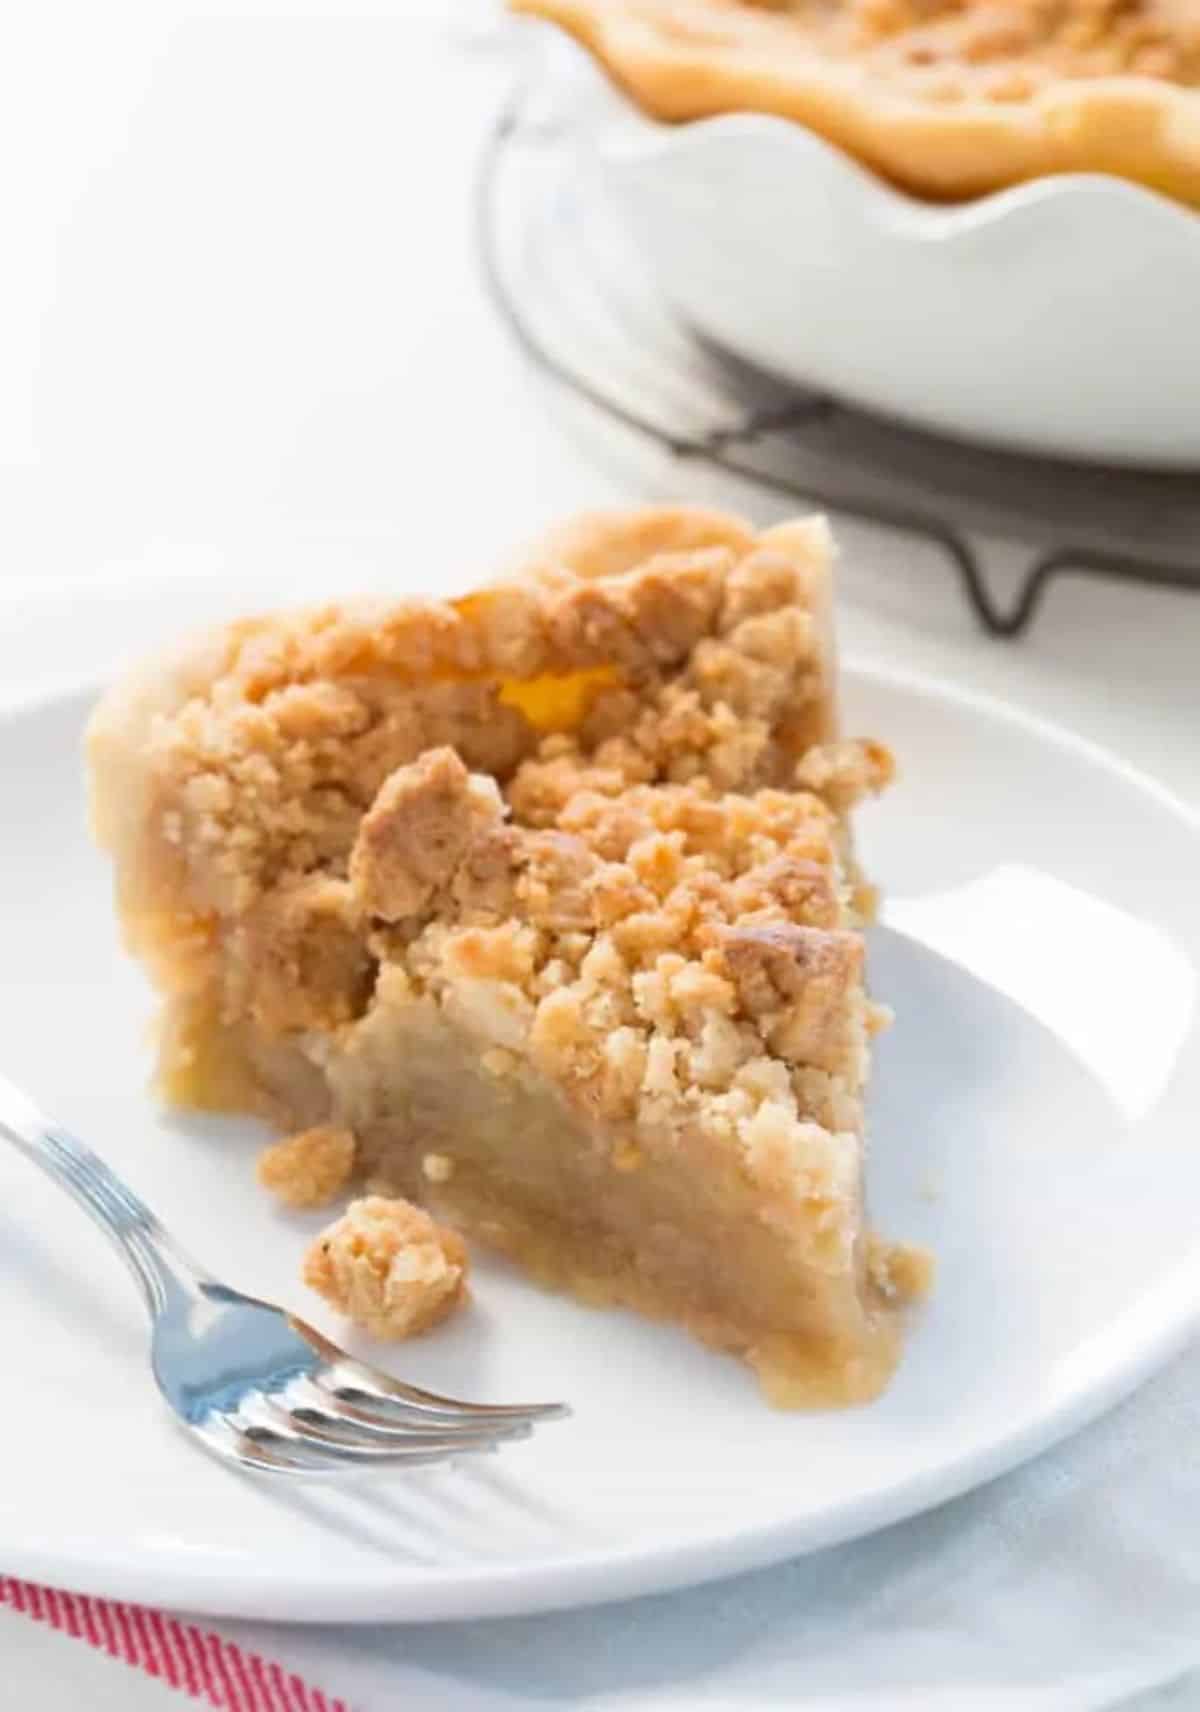 A piece of Gluten-Free Dutch Apple Pie with a Sweet Crumb Topping on a white plate with a fork.